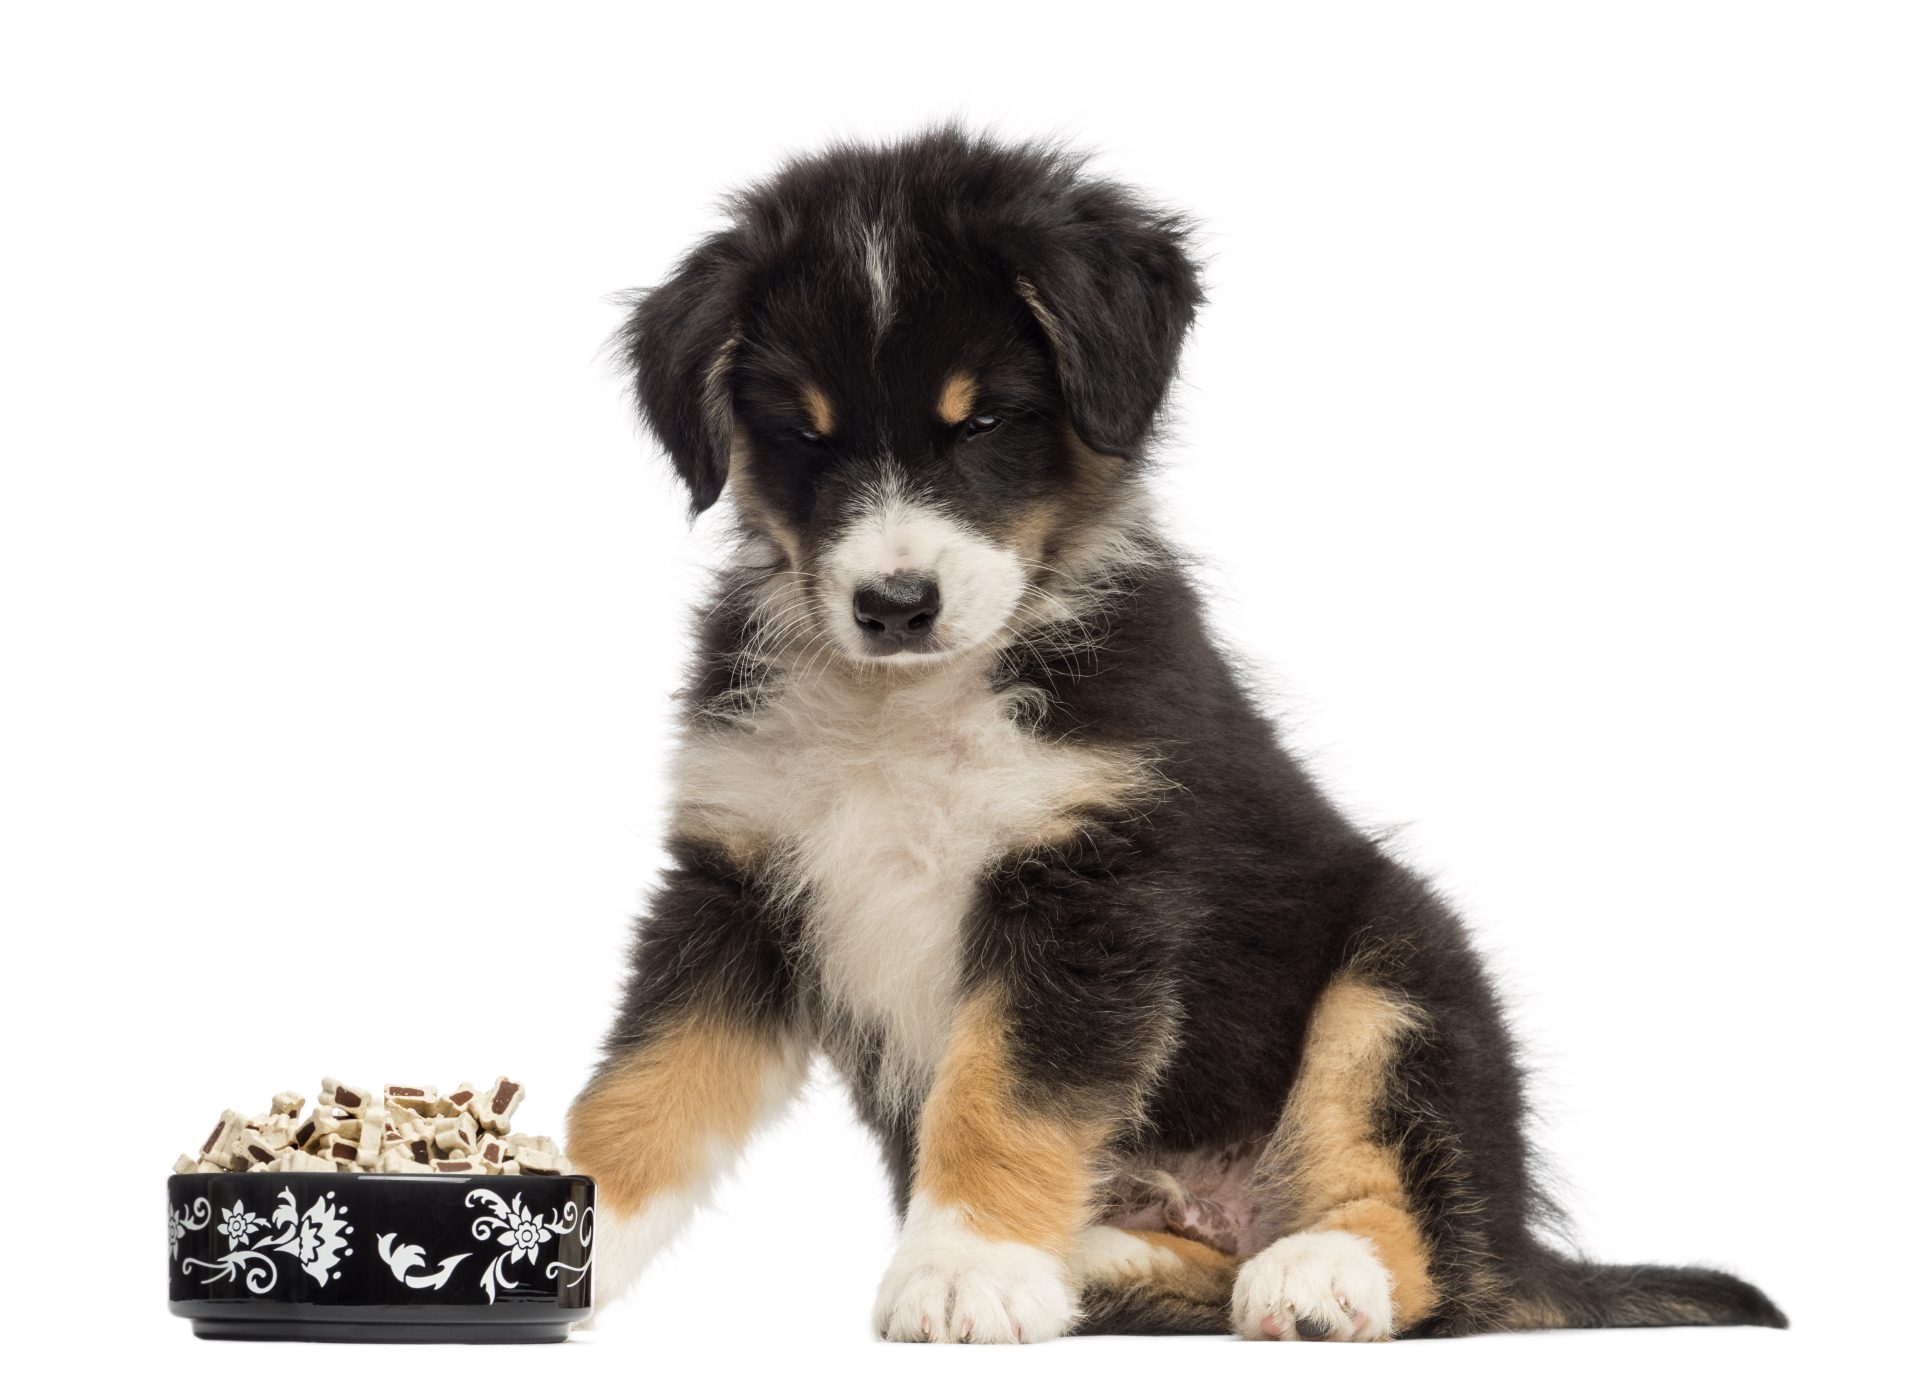 Foods Dogs Shouldn't Eat Dog with Bowl of Food Image